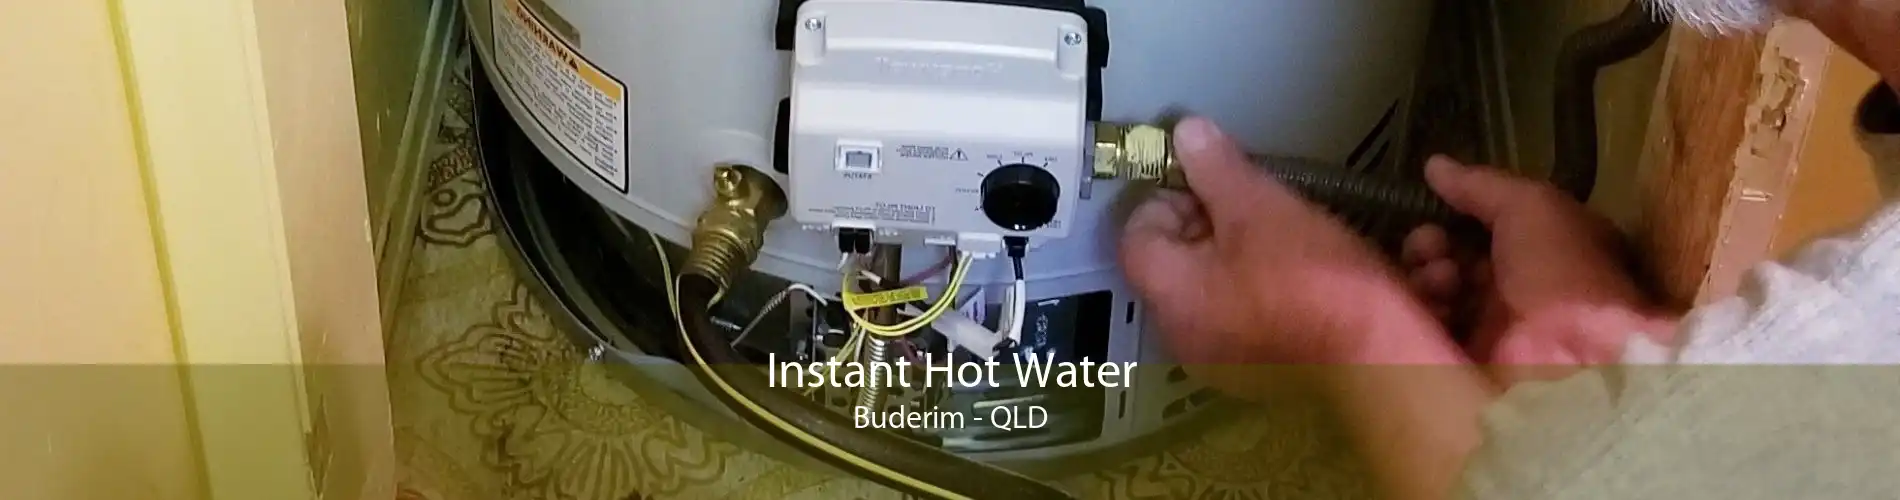 Instant Hot Water Buderim - QLD